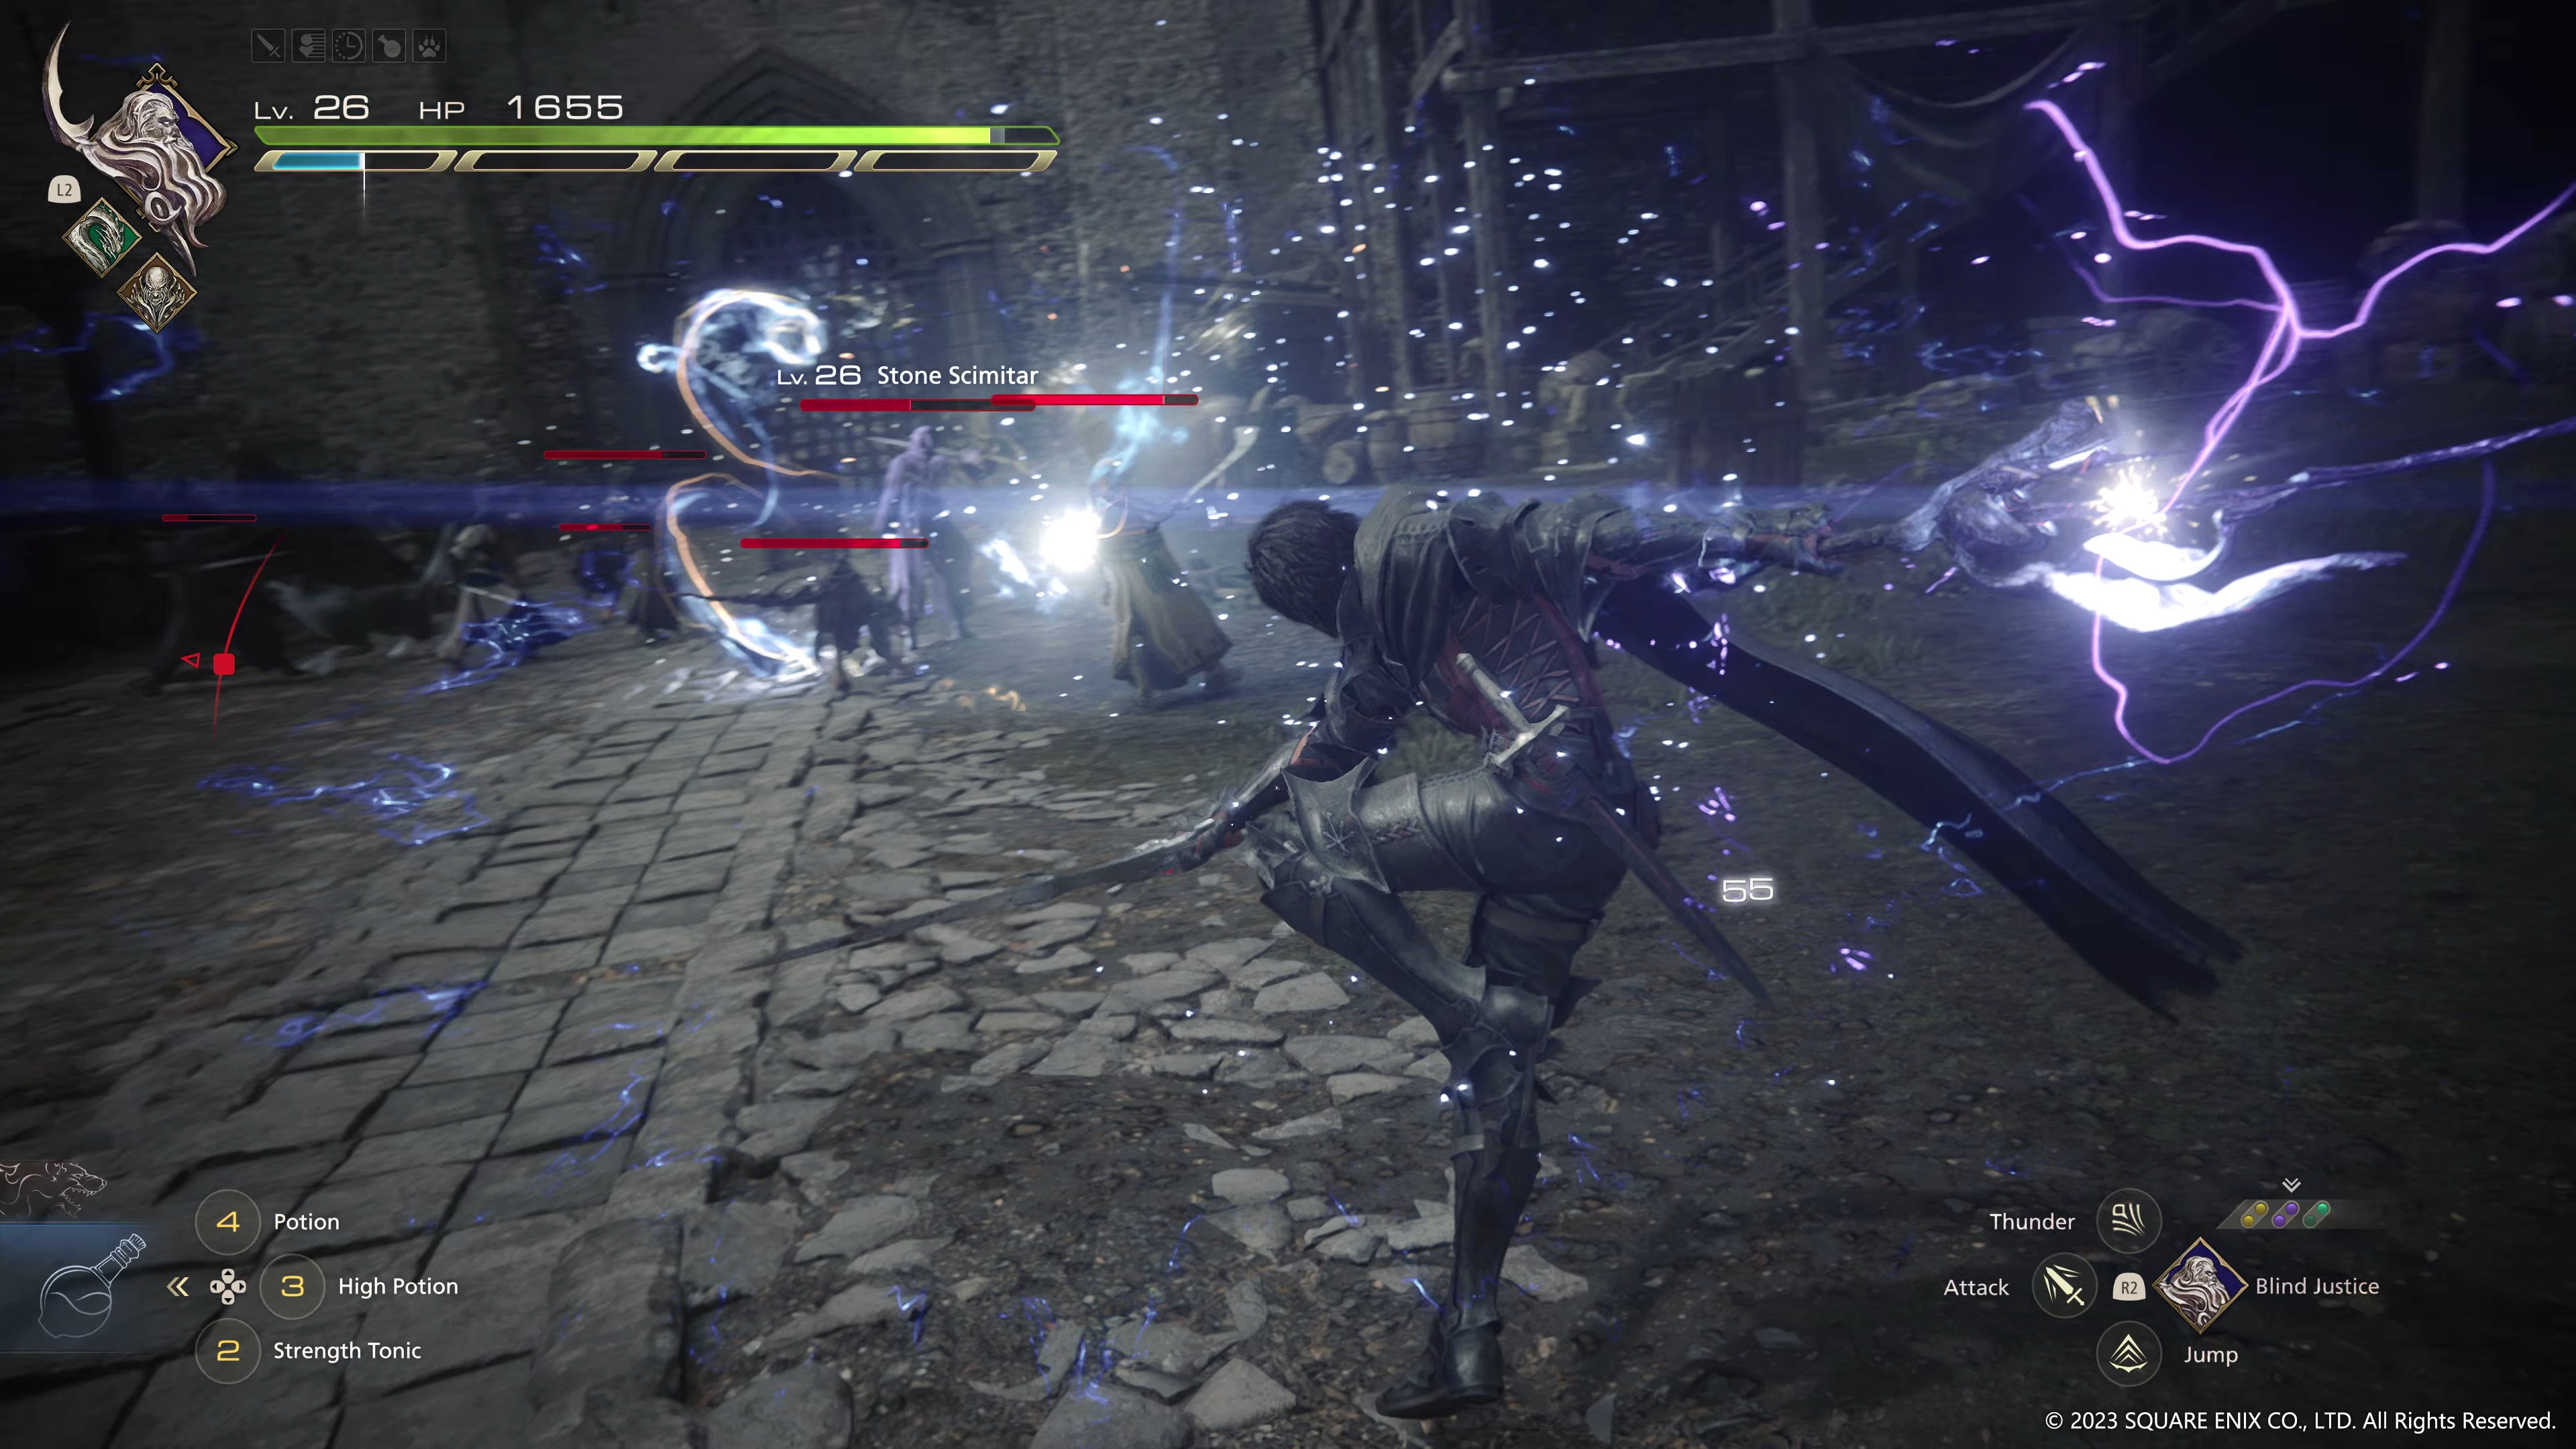 Here's 18 minutes of new Final Fantasy 16 gameplay